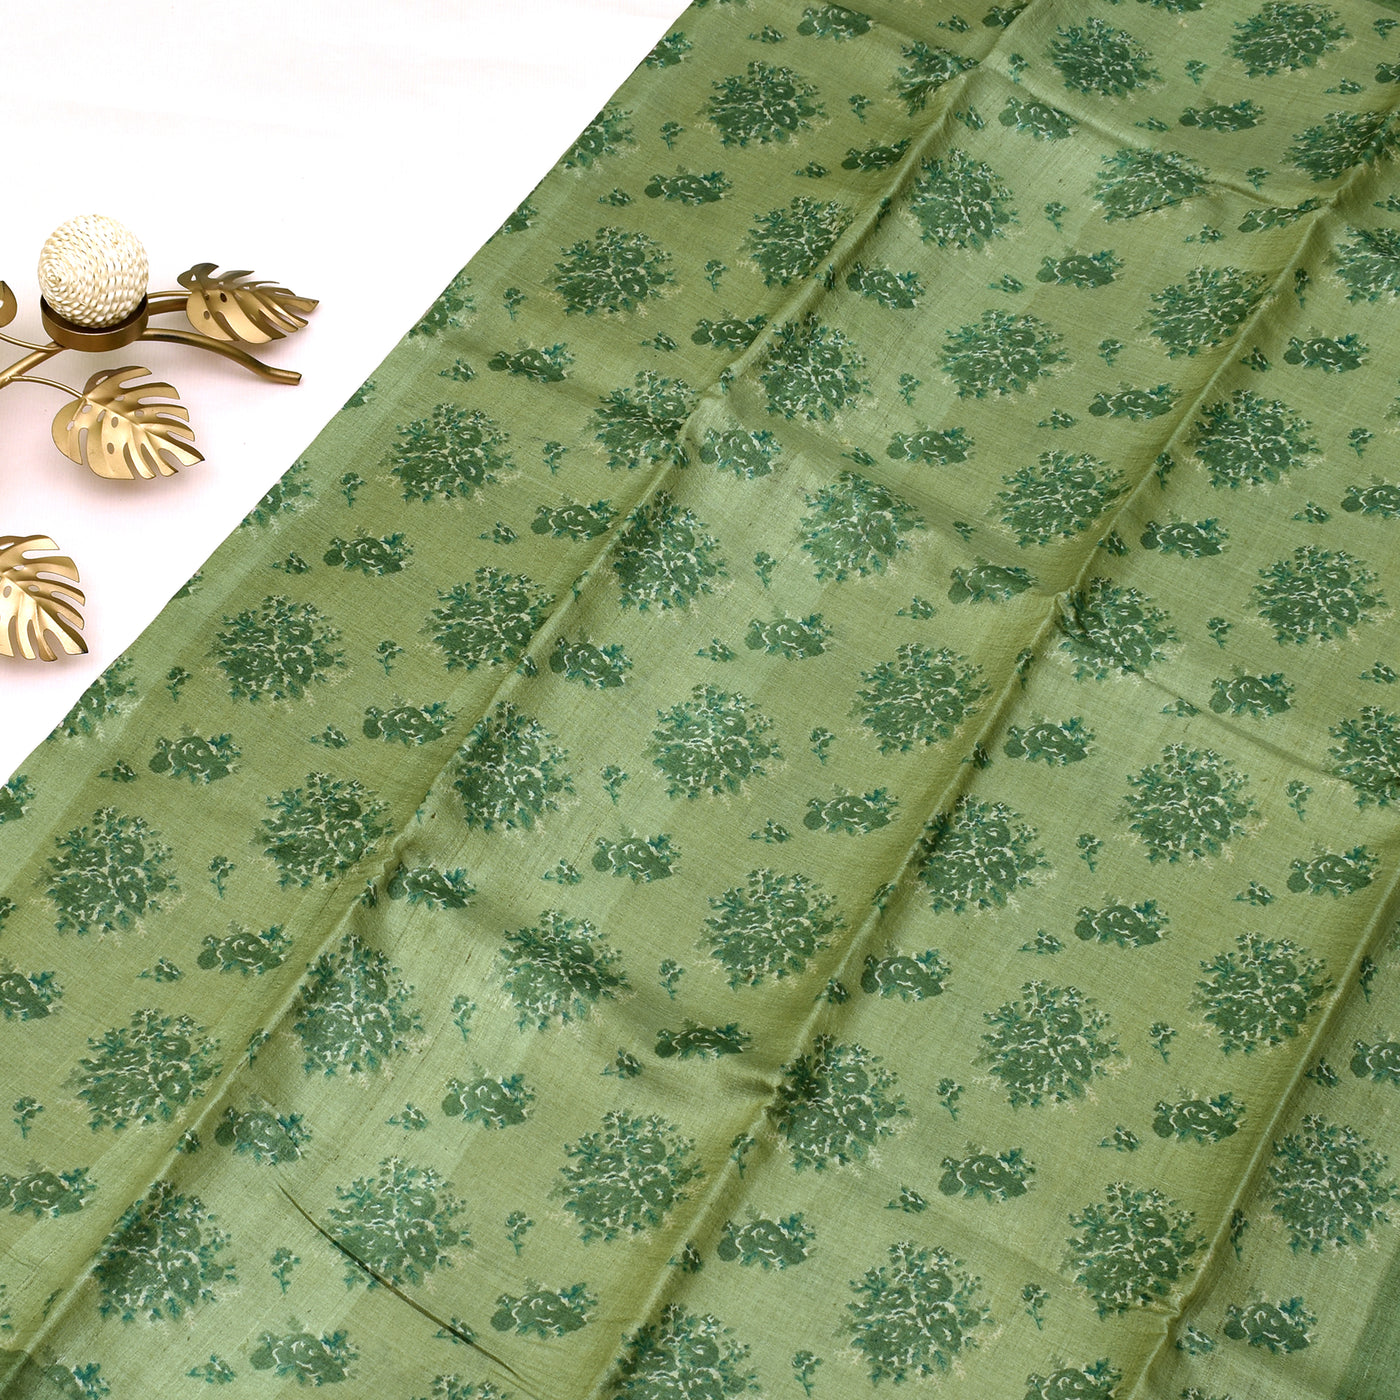 Apple Green Tussar Printed Saree with Floral Design